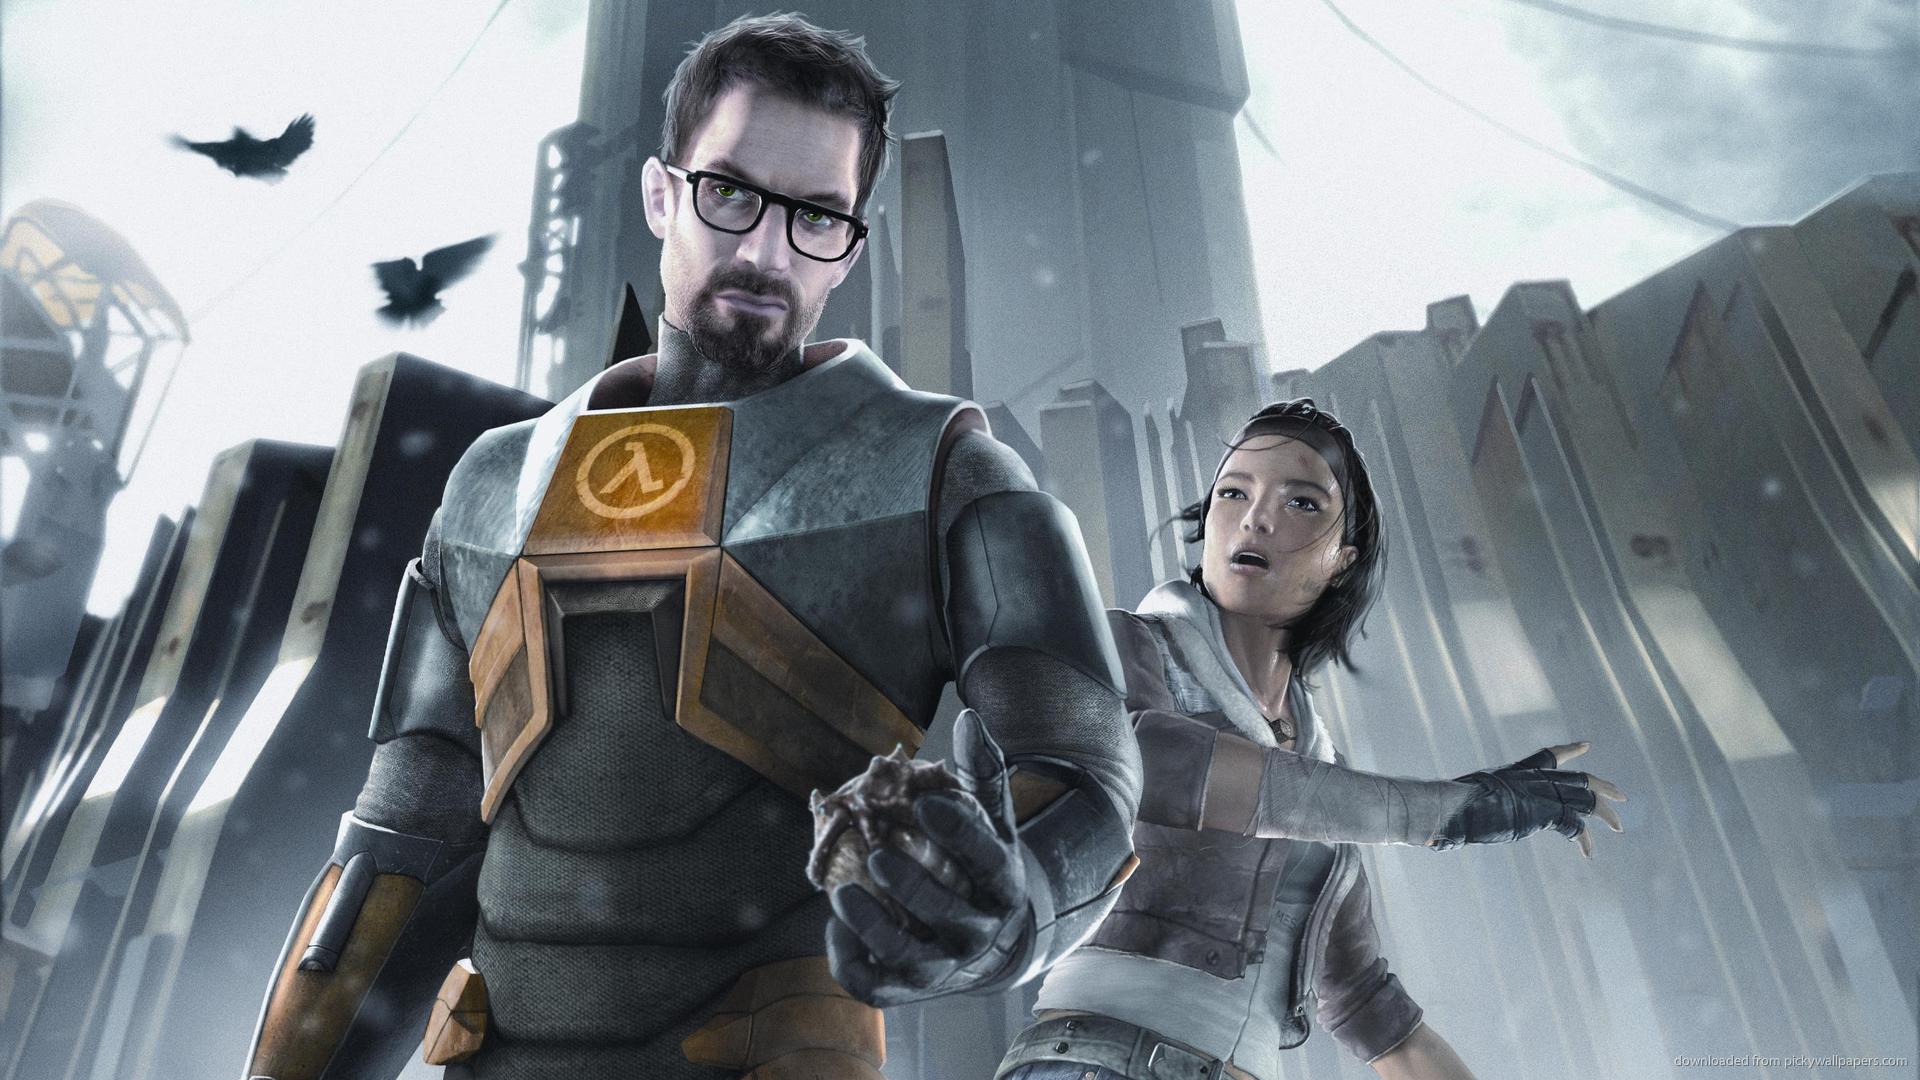 Image for Valve officially announces Half-Life: Alyx VR game, reveal coming Thursday